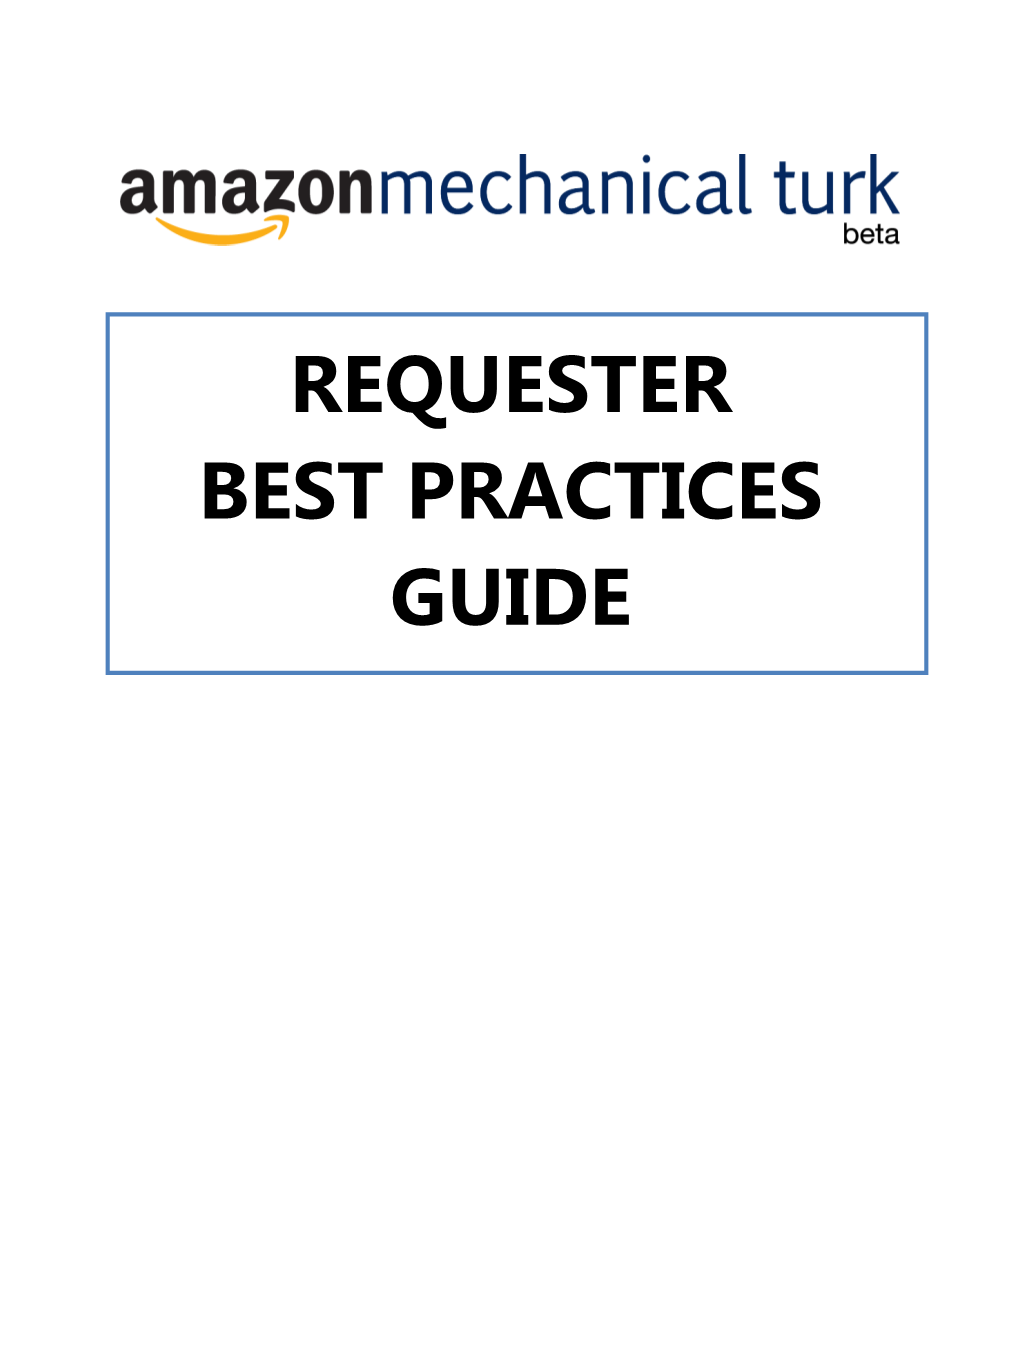 Requester Best Practices Guide